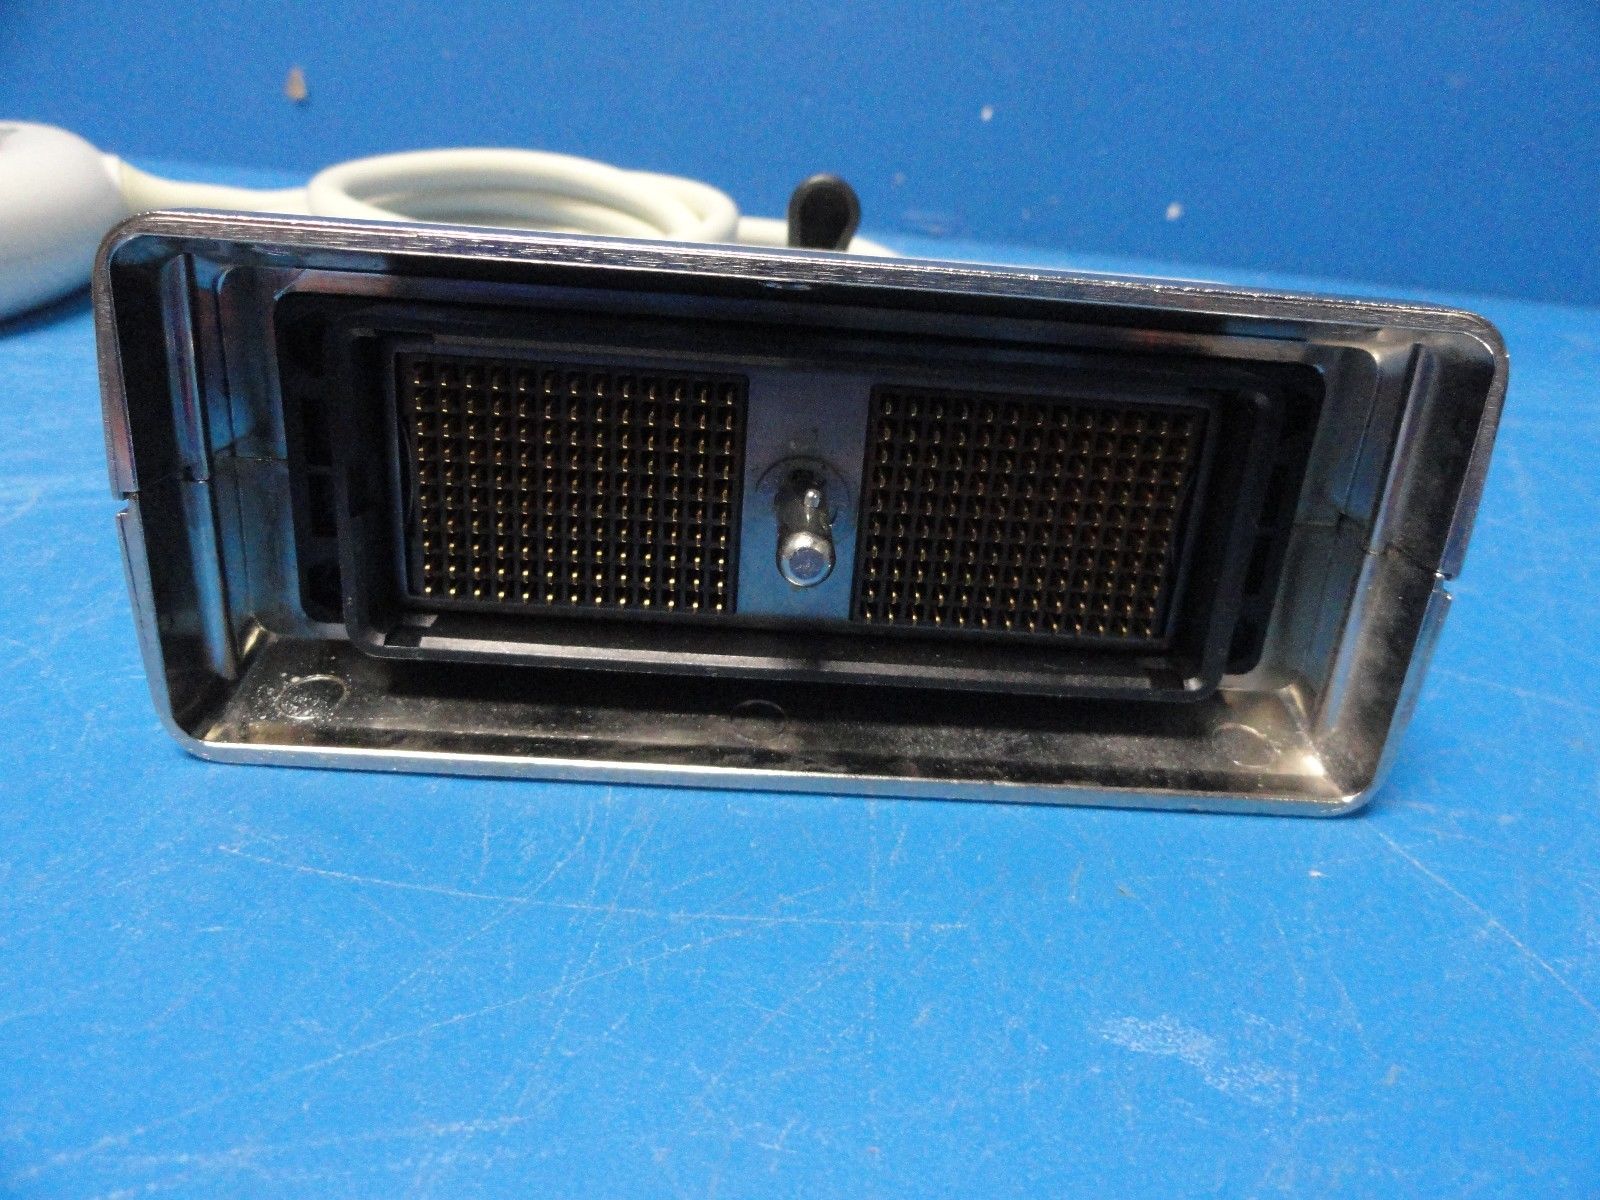 a close up of an electronic device on a table